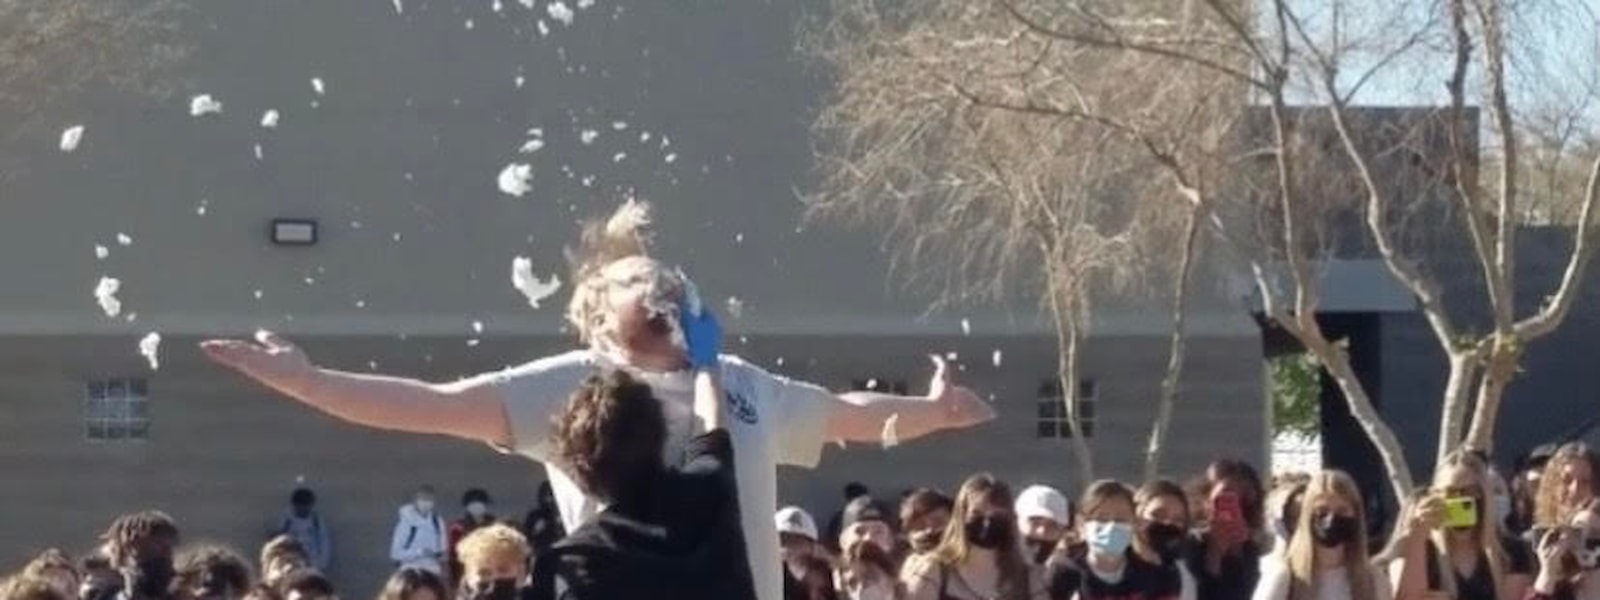 teacher getting a pie to the face